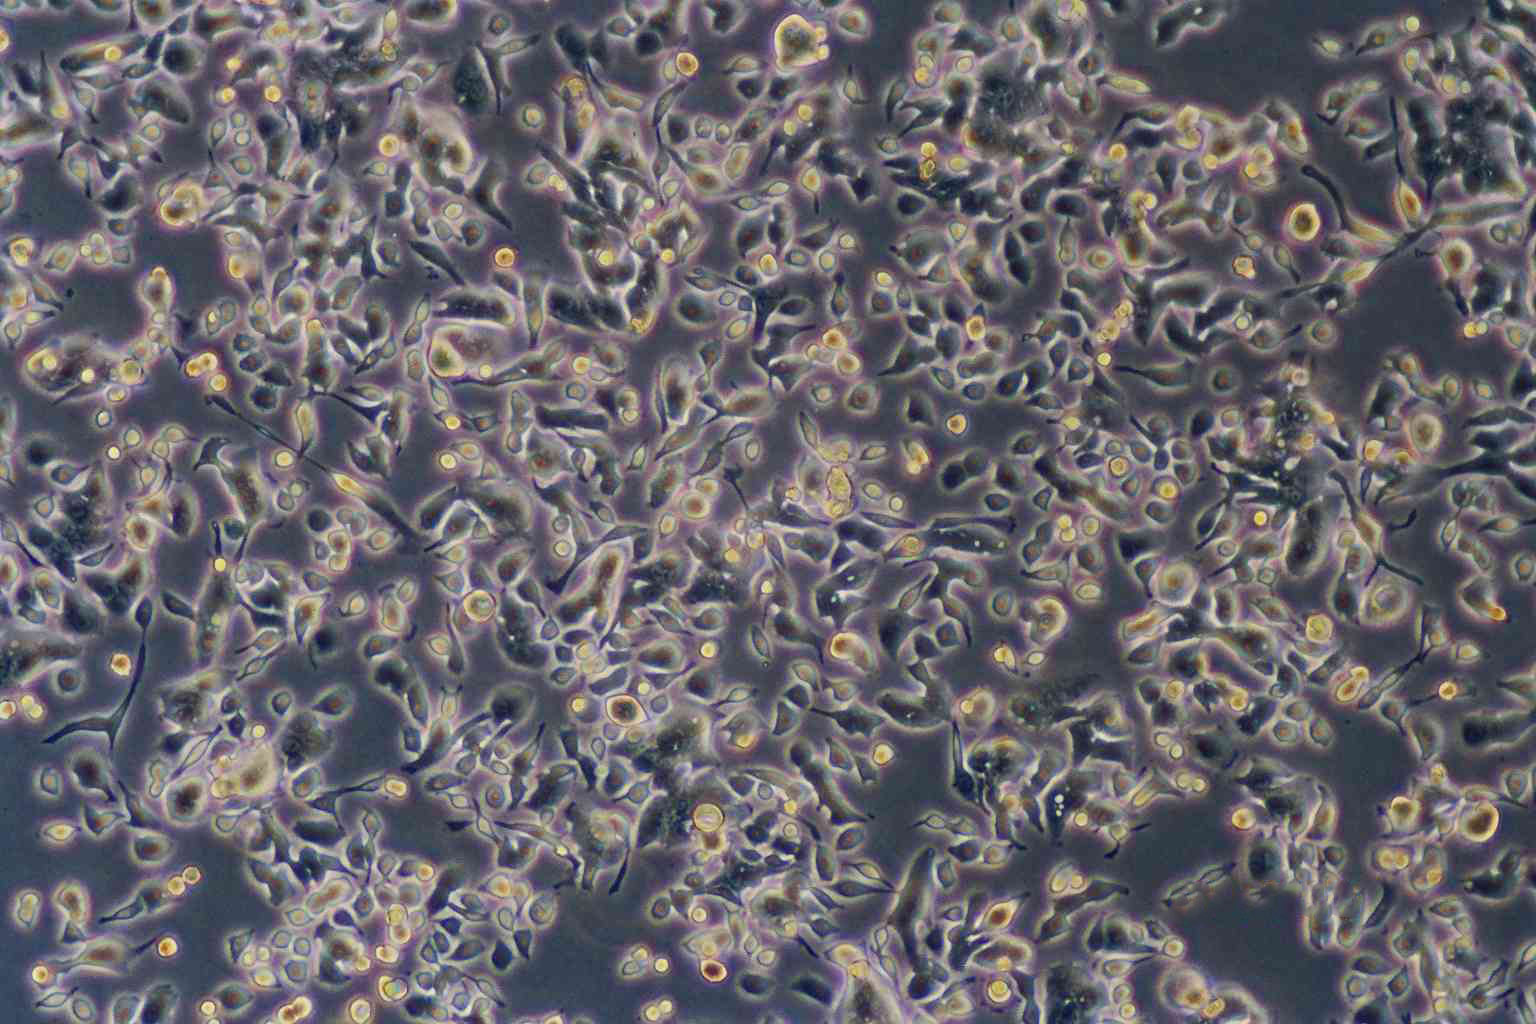 LS180 epithelioid cells人结肠腺癌细胞系,LS180 epithelioid cells